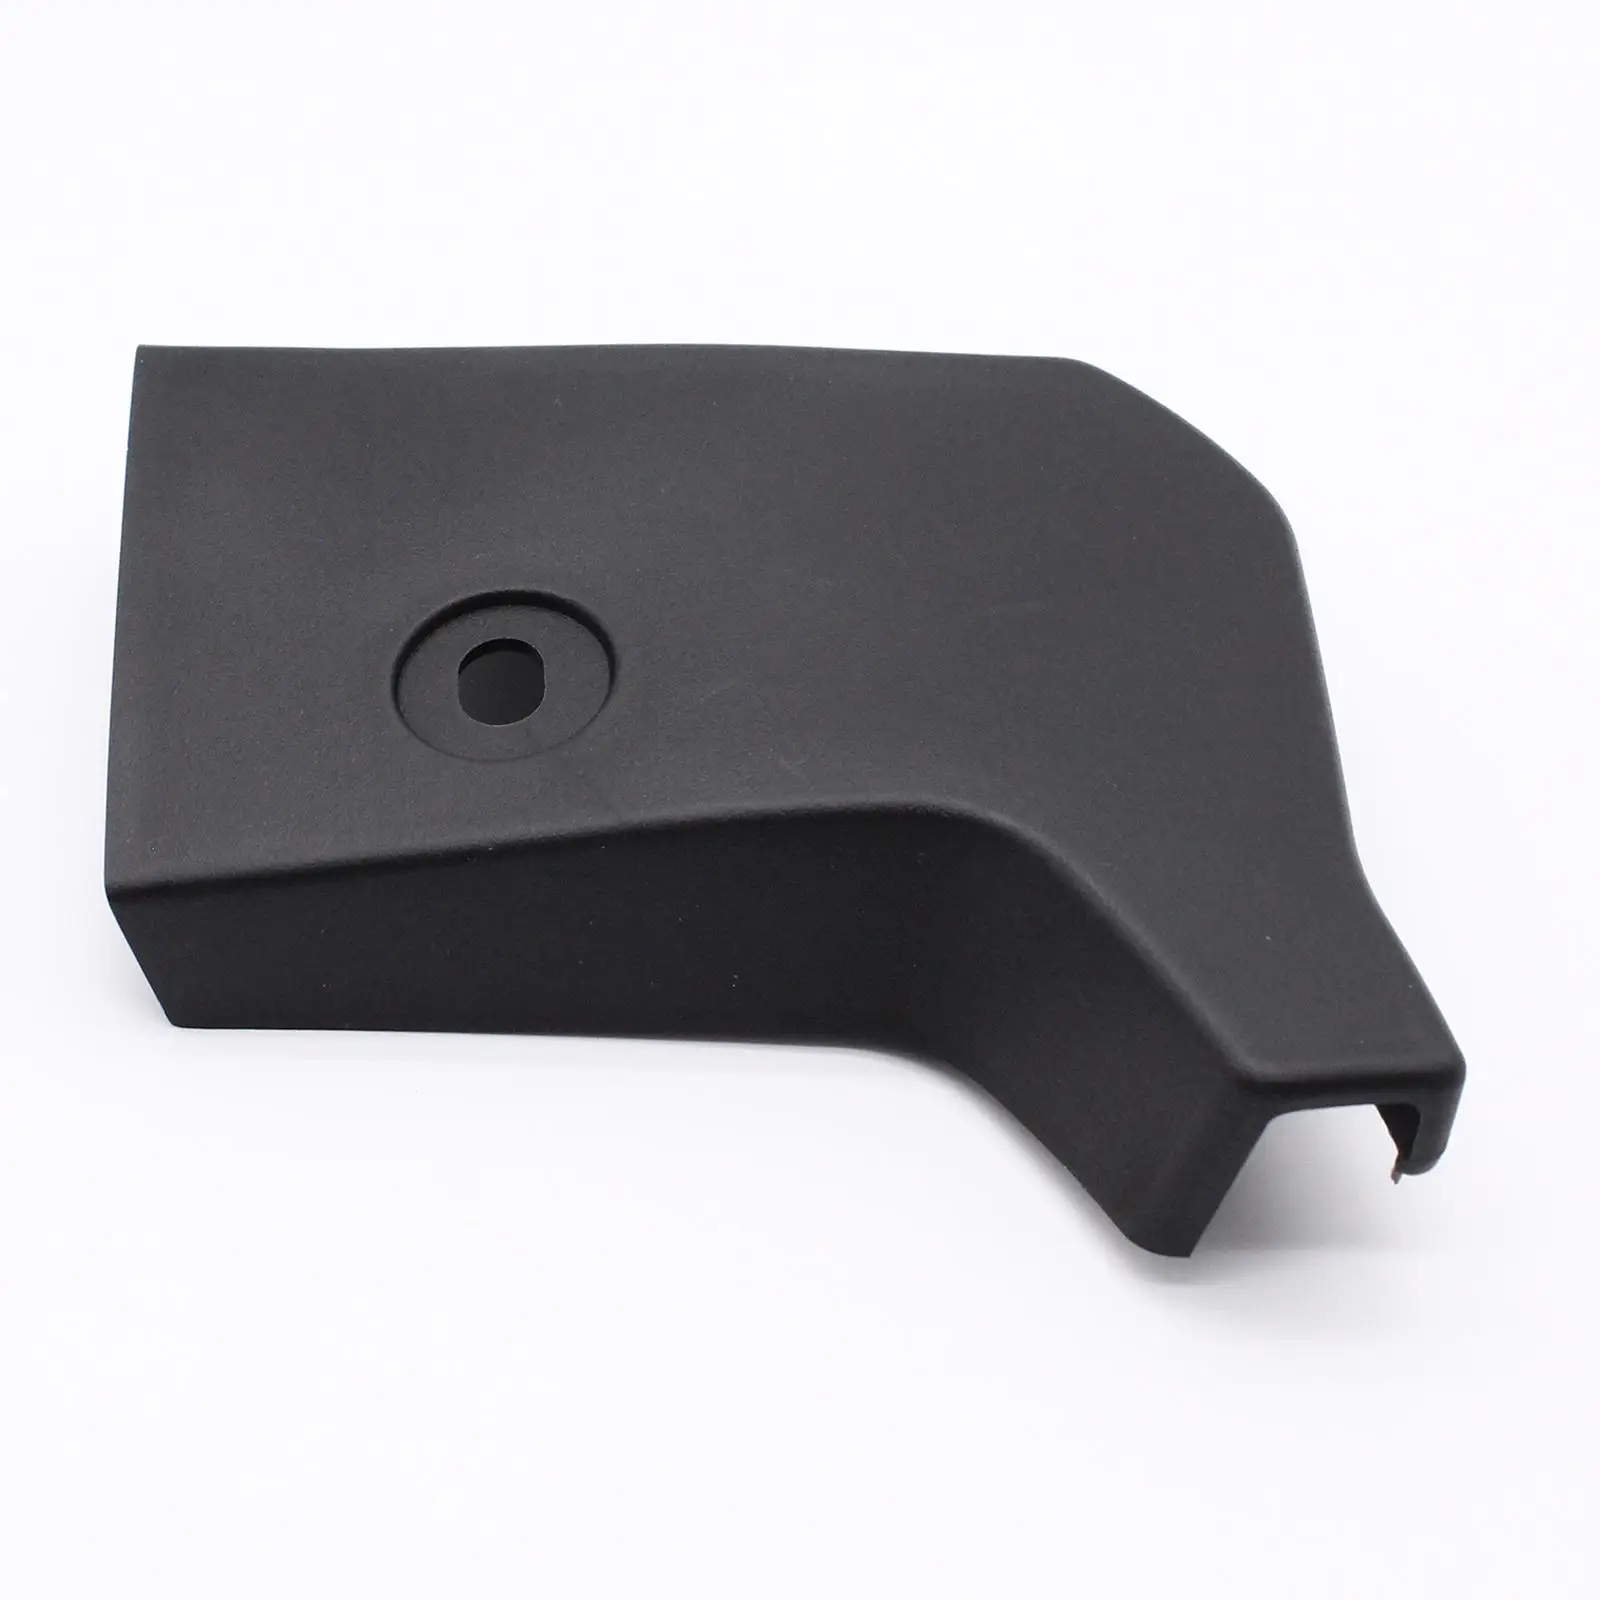  Skirt End Caps , 1771885  for  MK7 O S Premium  Replacement